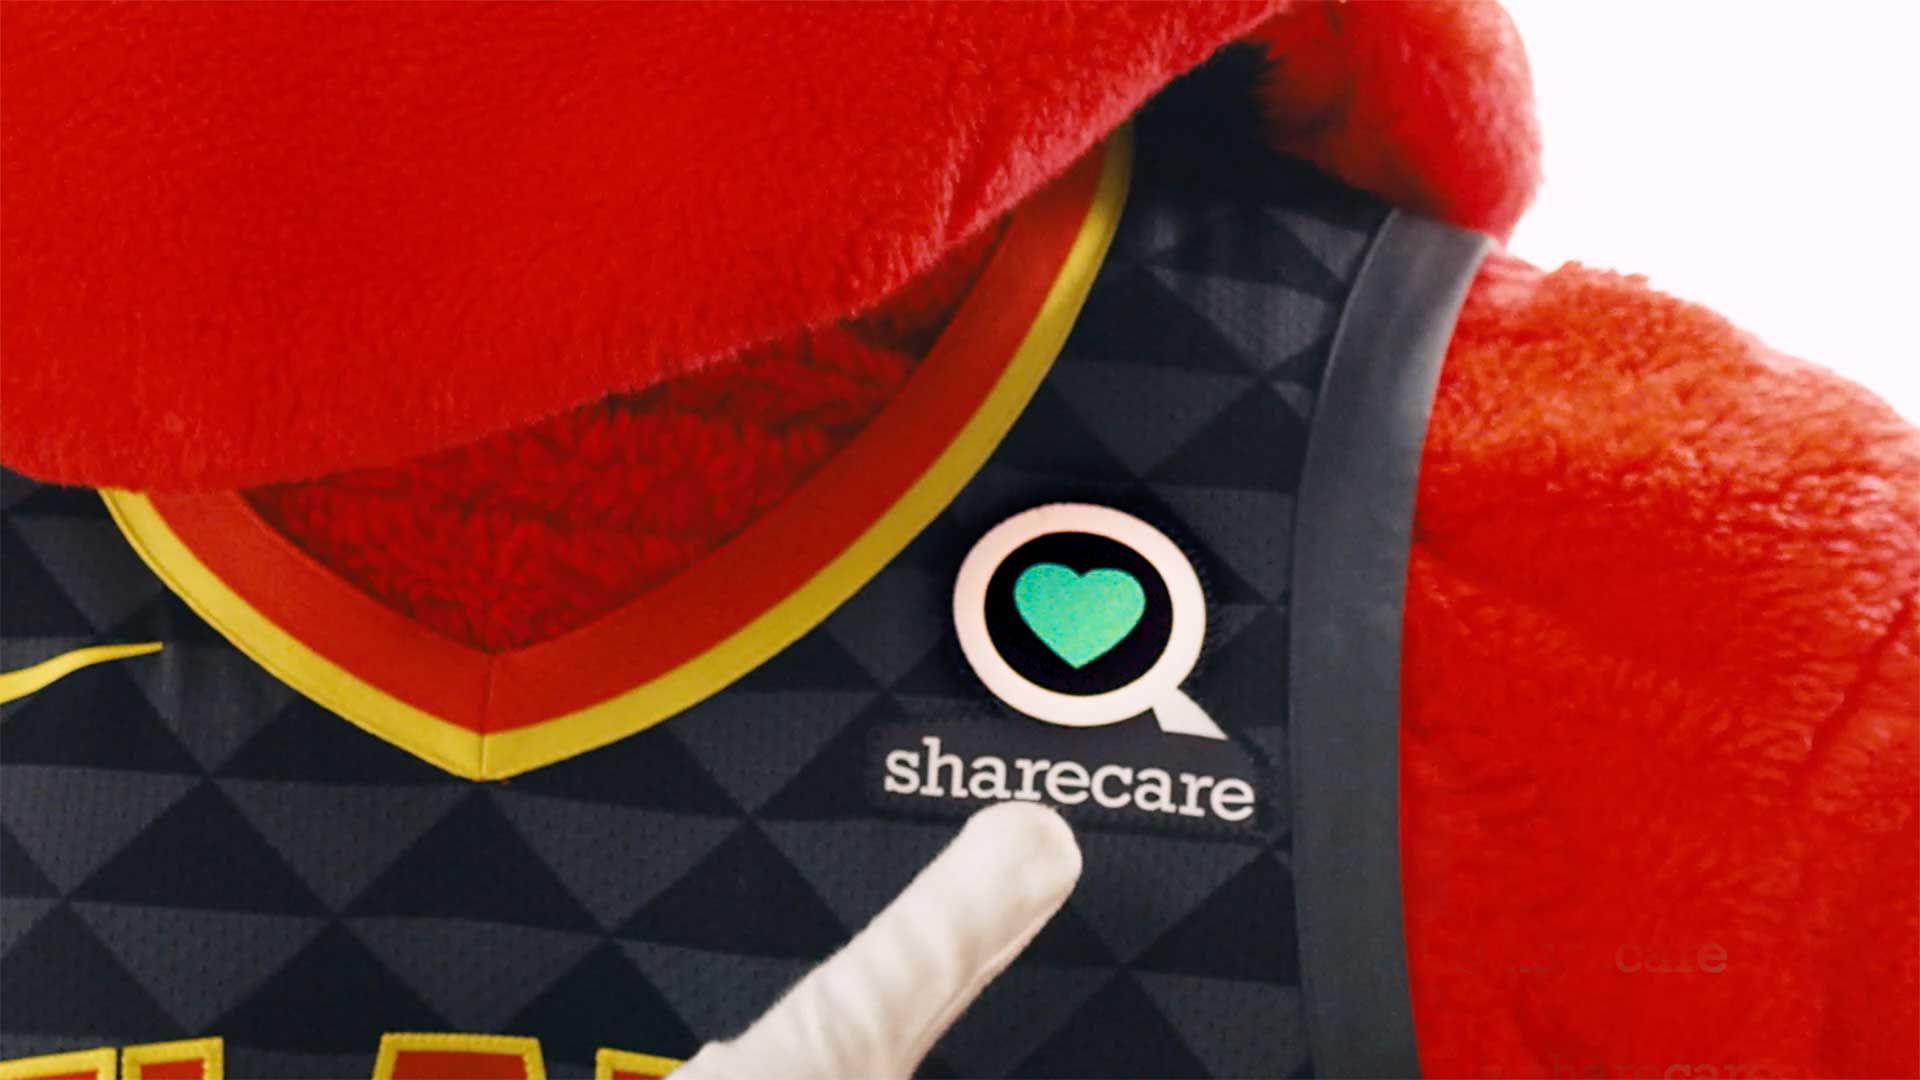 Atlanta Haws jersey with Sharecare patch